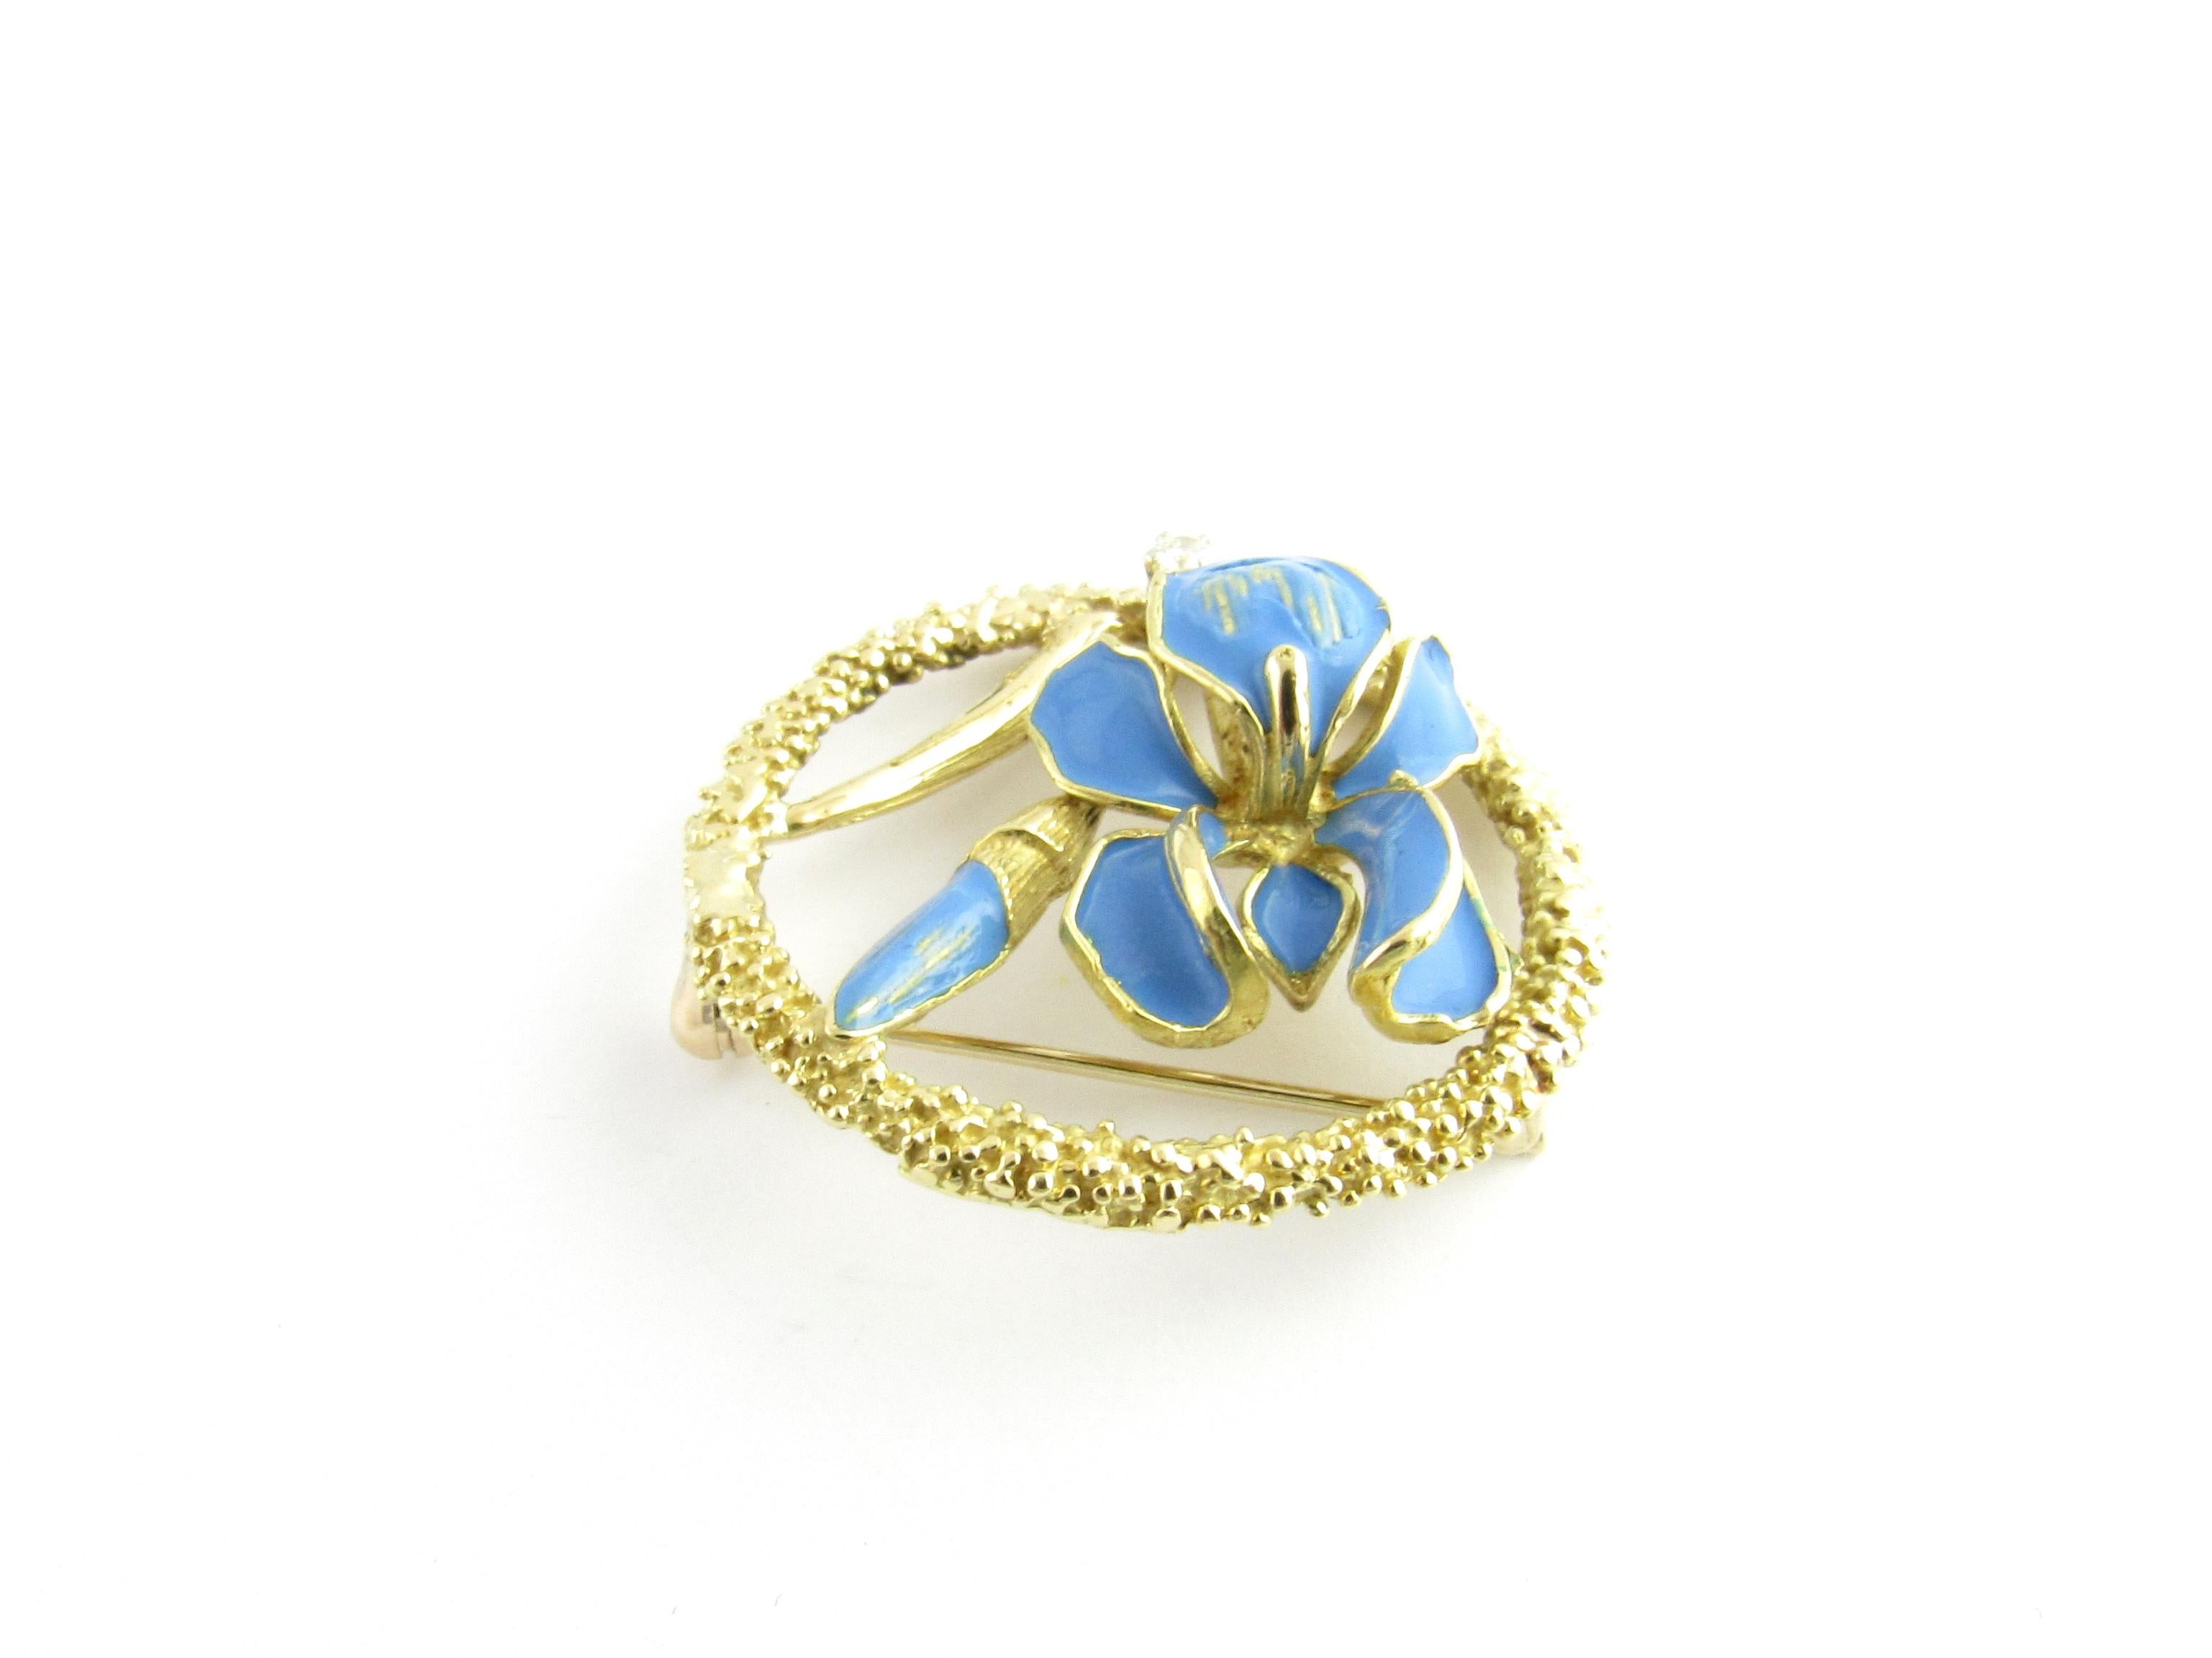 Women's 18 Karat Yellow Gold and Blue Enamel Floral Brooch or Pin